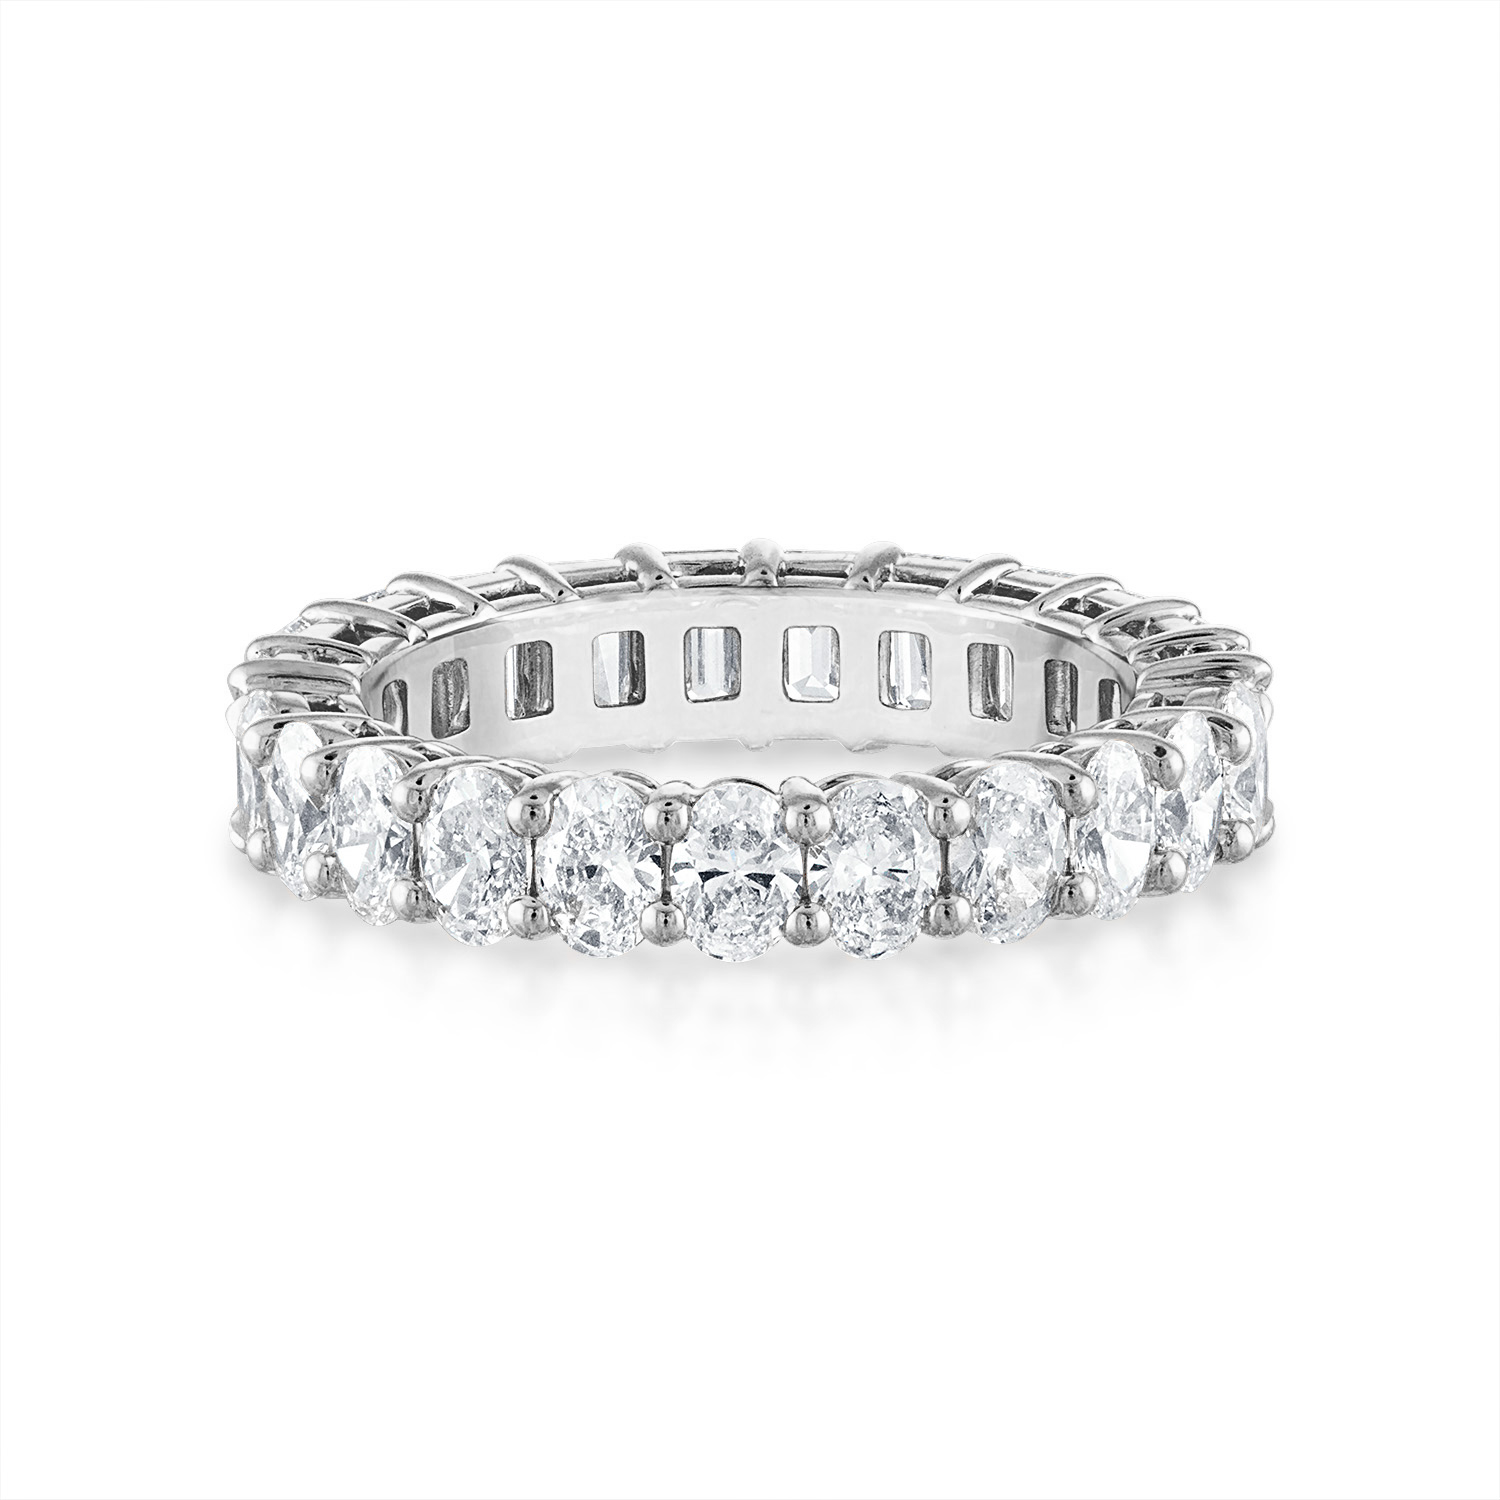 The Oval & Emerald Undecided® Eternity Band